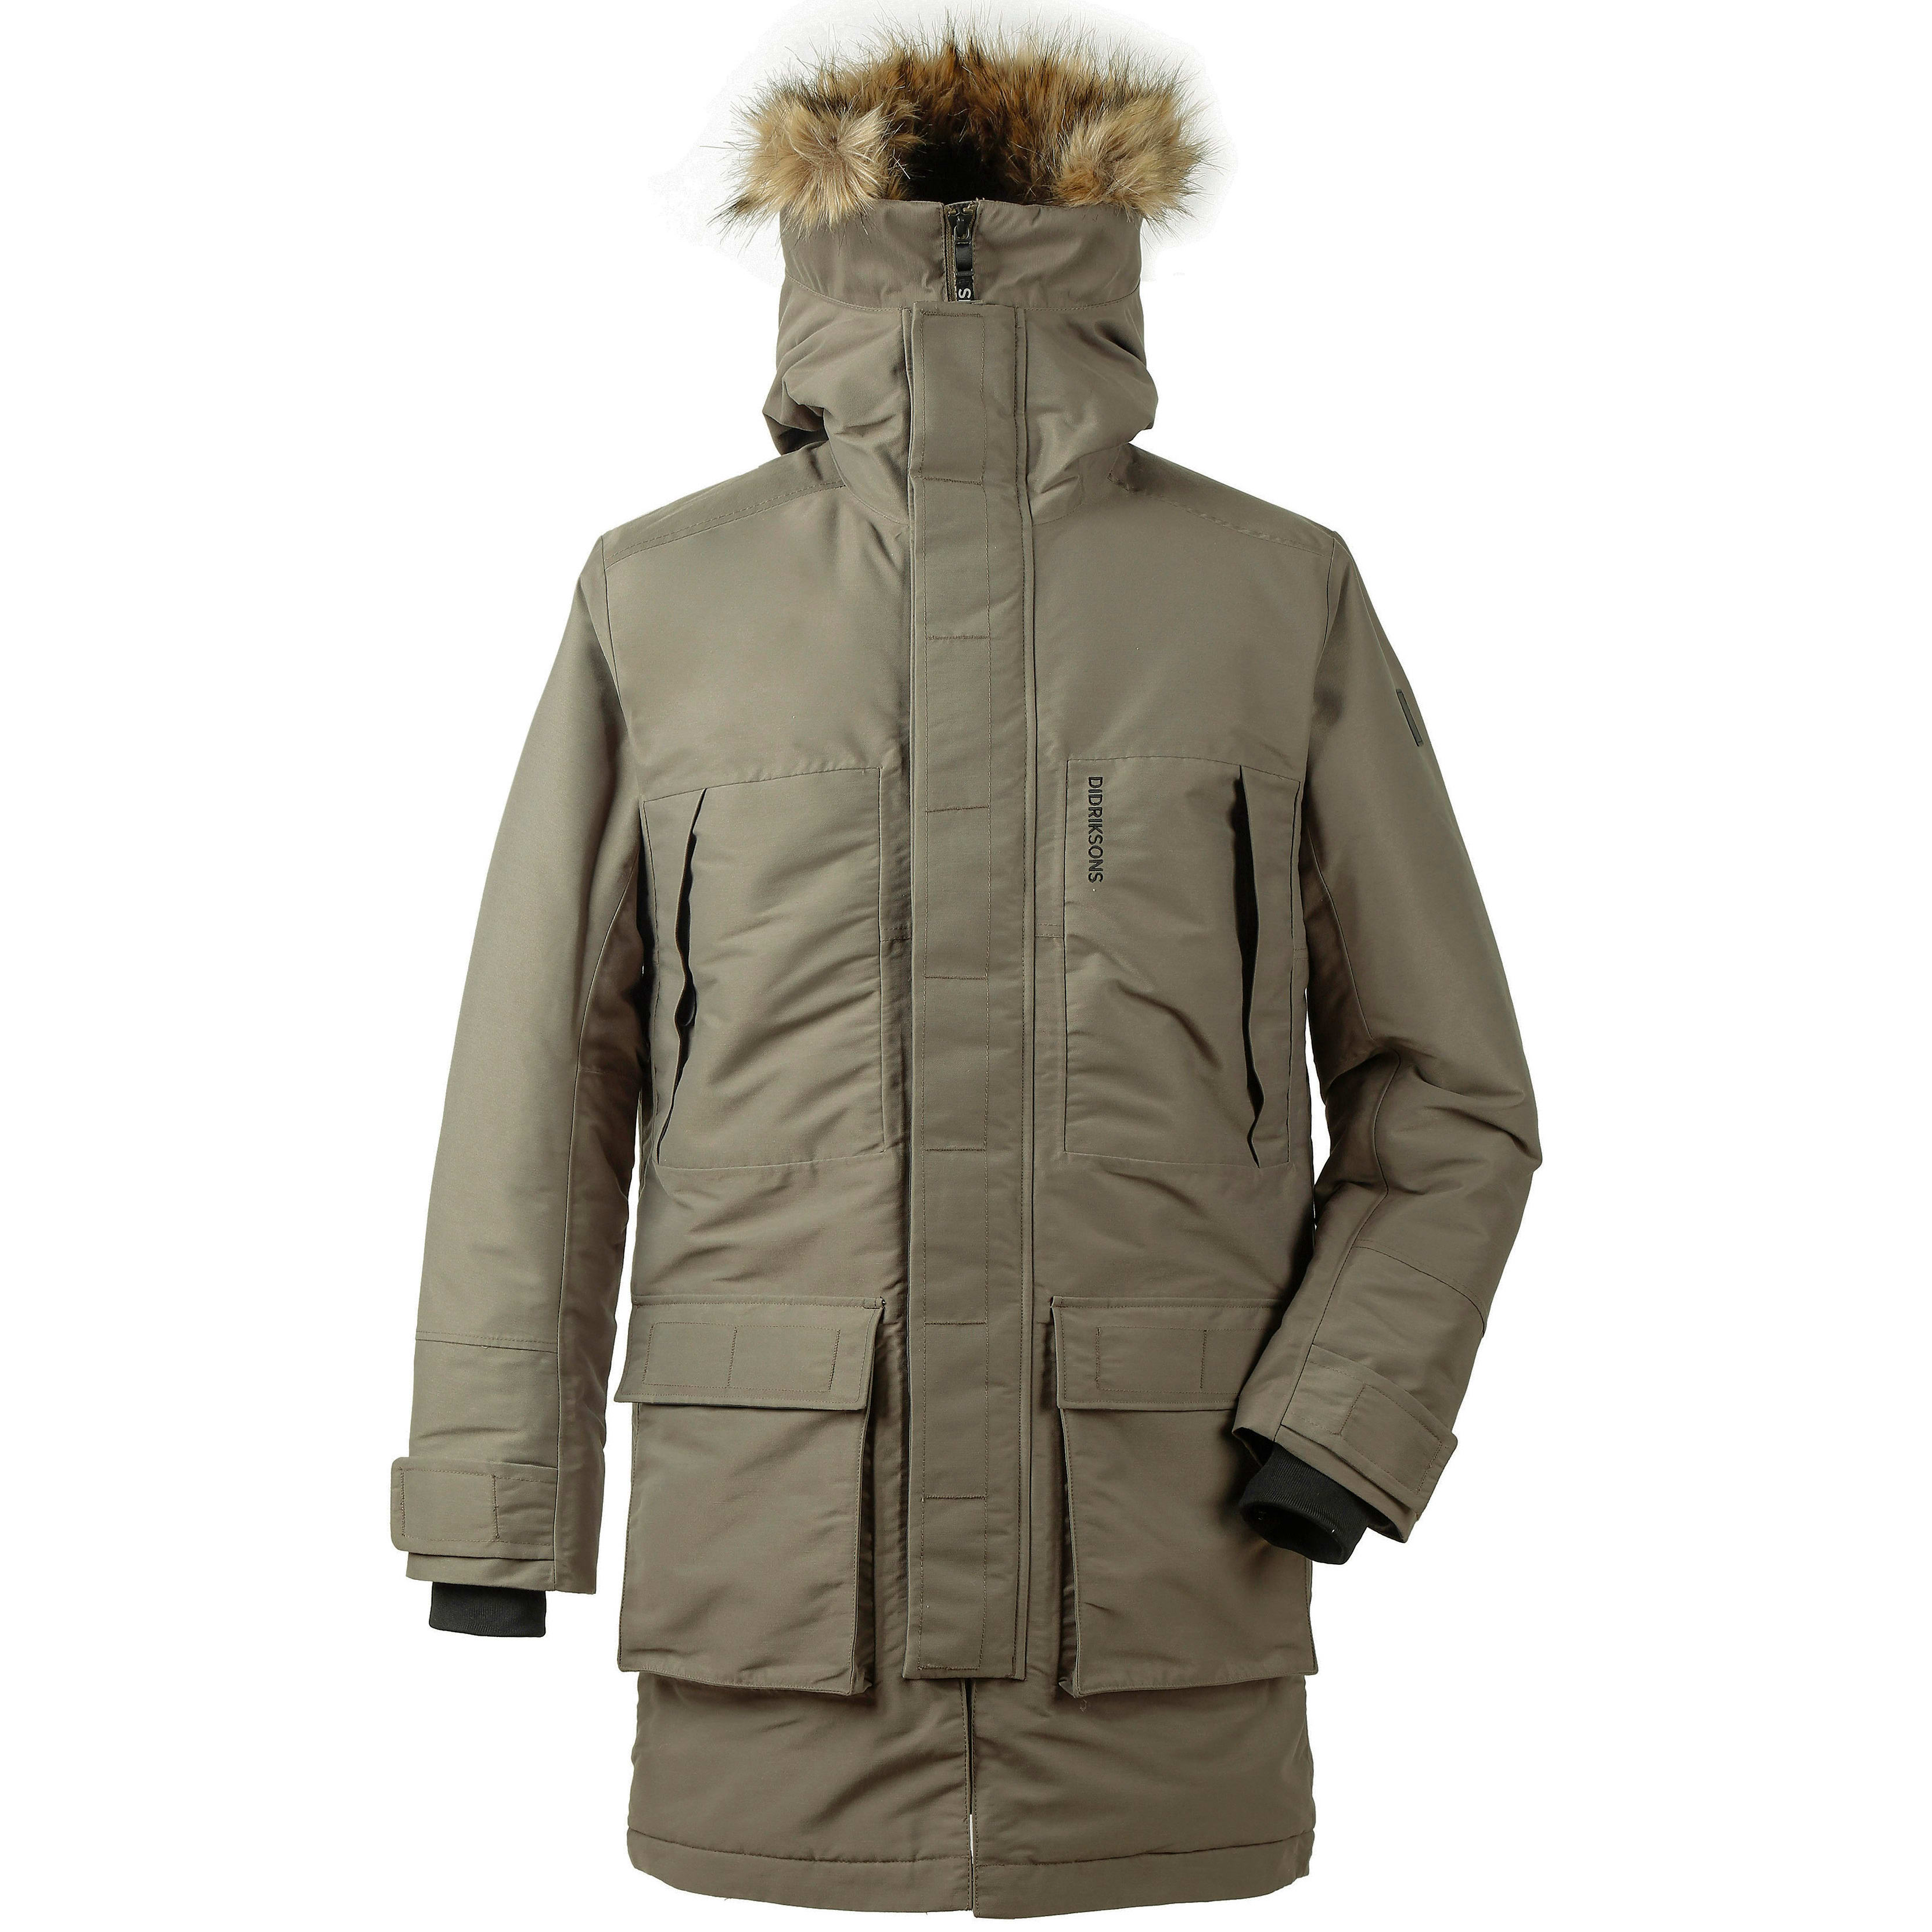 Buy Didriksons Ben Men's Parka from Outnorth